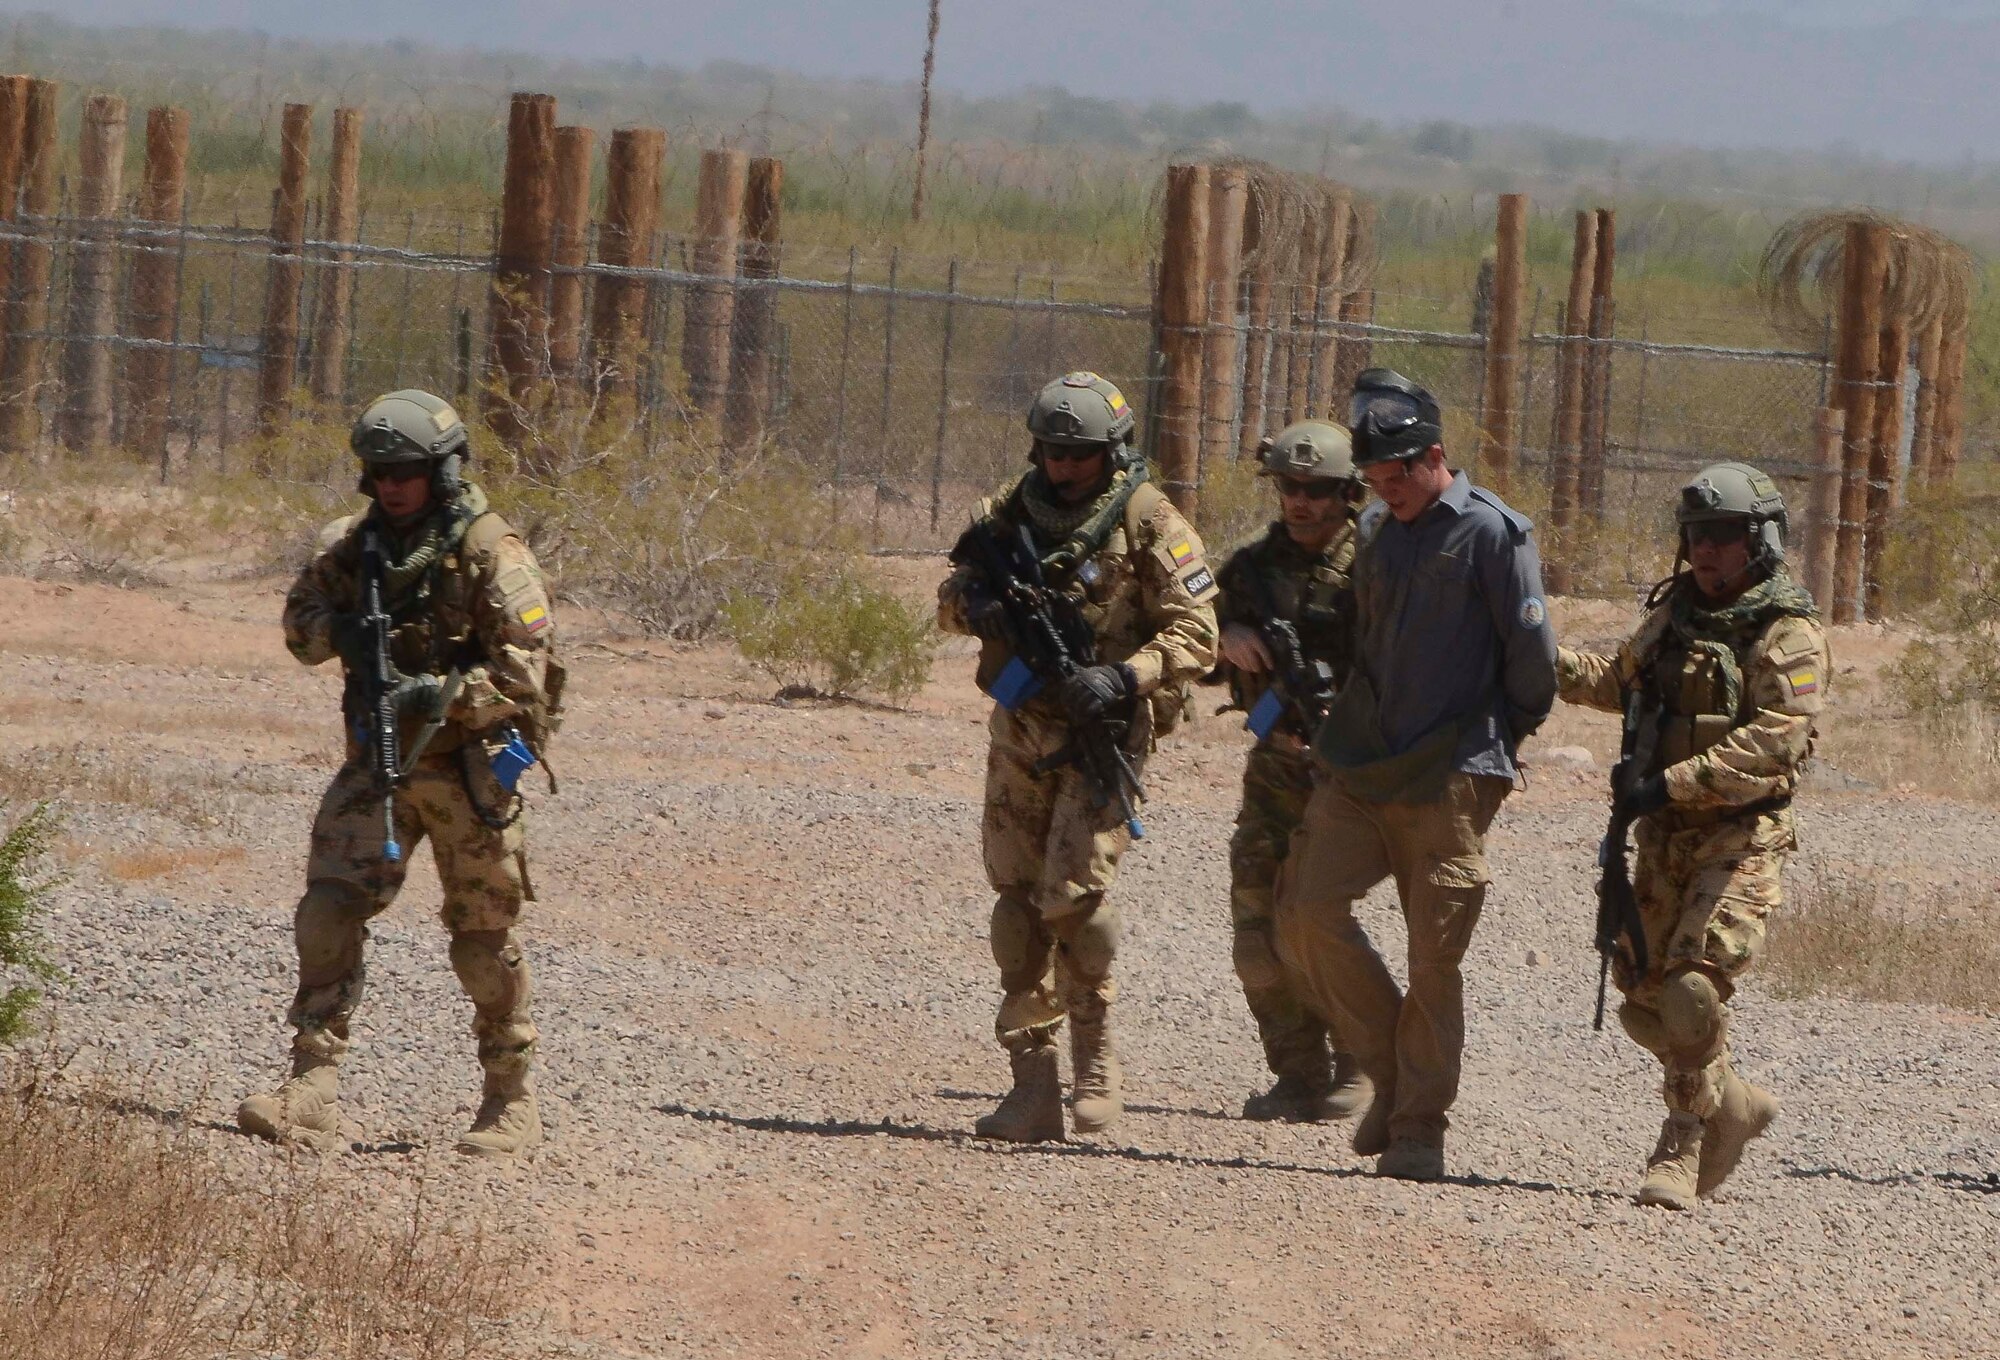 Members of a Multinational Search and Rescue Team  capture an opposition force member during a training mission in Exercise ANGEL THUNDER on May 16, 2014 at the Florence Military Reservation, Ariz. ANGEL THUNDER 2014 is the largest and most realistic joint service, multinational, interagency combat search and rescue exercise designed to provide training for personnel recovery assets using a variety of scenarios to simulate deployment conditions and contingencies. Personnel recovery forces will train through the full spectrum of personnel recovery capabilities with ground recovery personnel, air assets, and interagency teams. (U.S. Air Force photo by Staff Sgt. Adam Grant/Released)